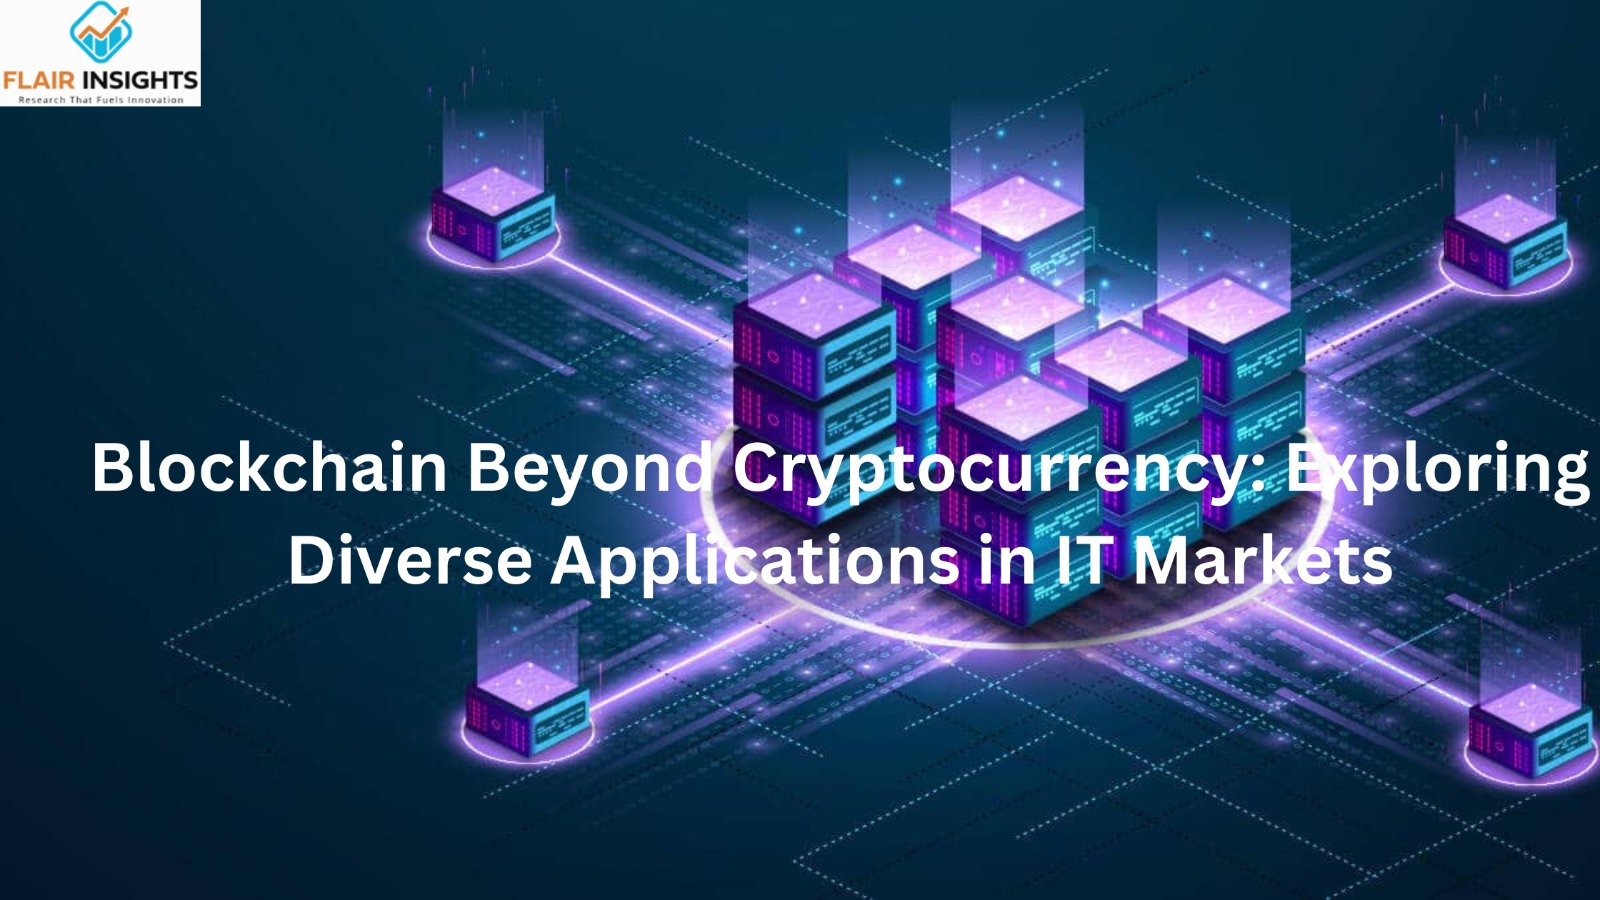 Blockchain Beyond Cryptocurrency: Exploring Diverse Applications in IT Markets